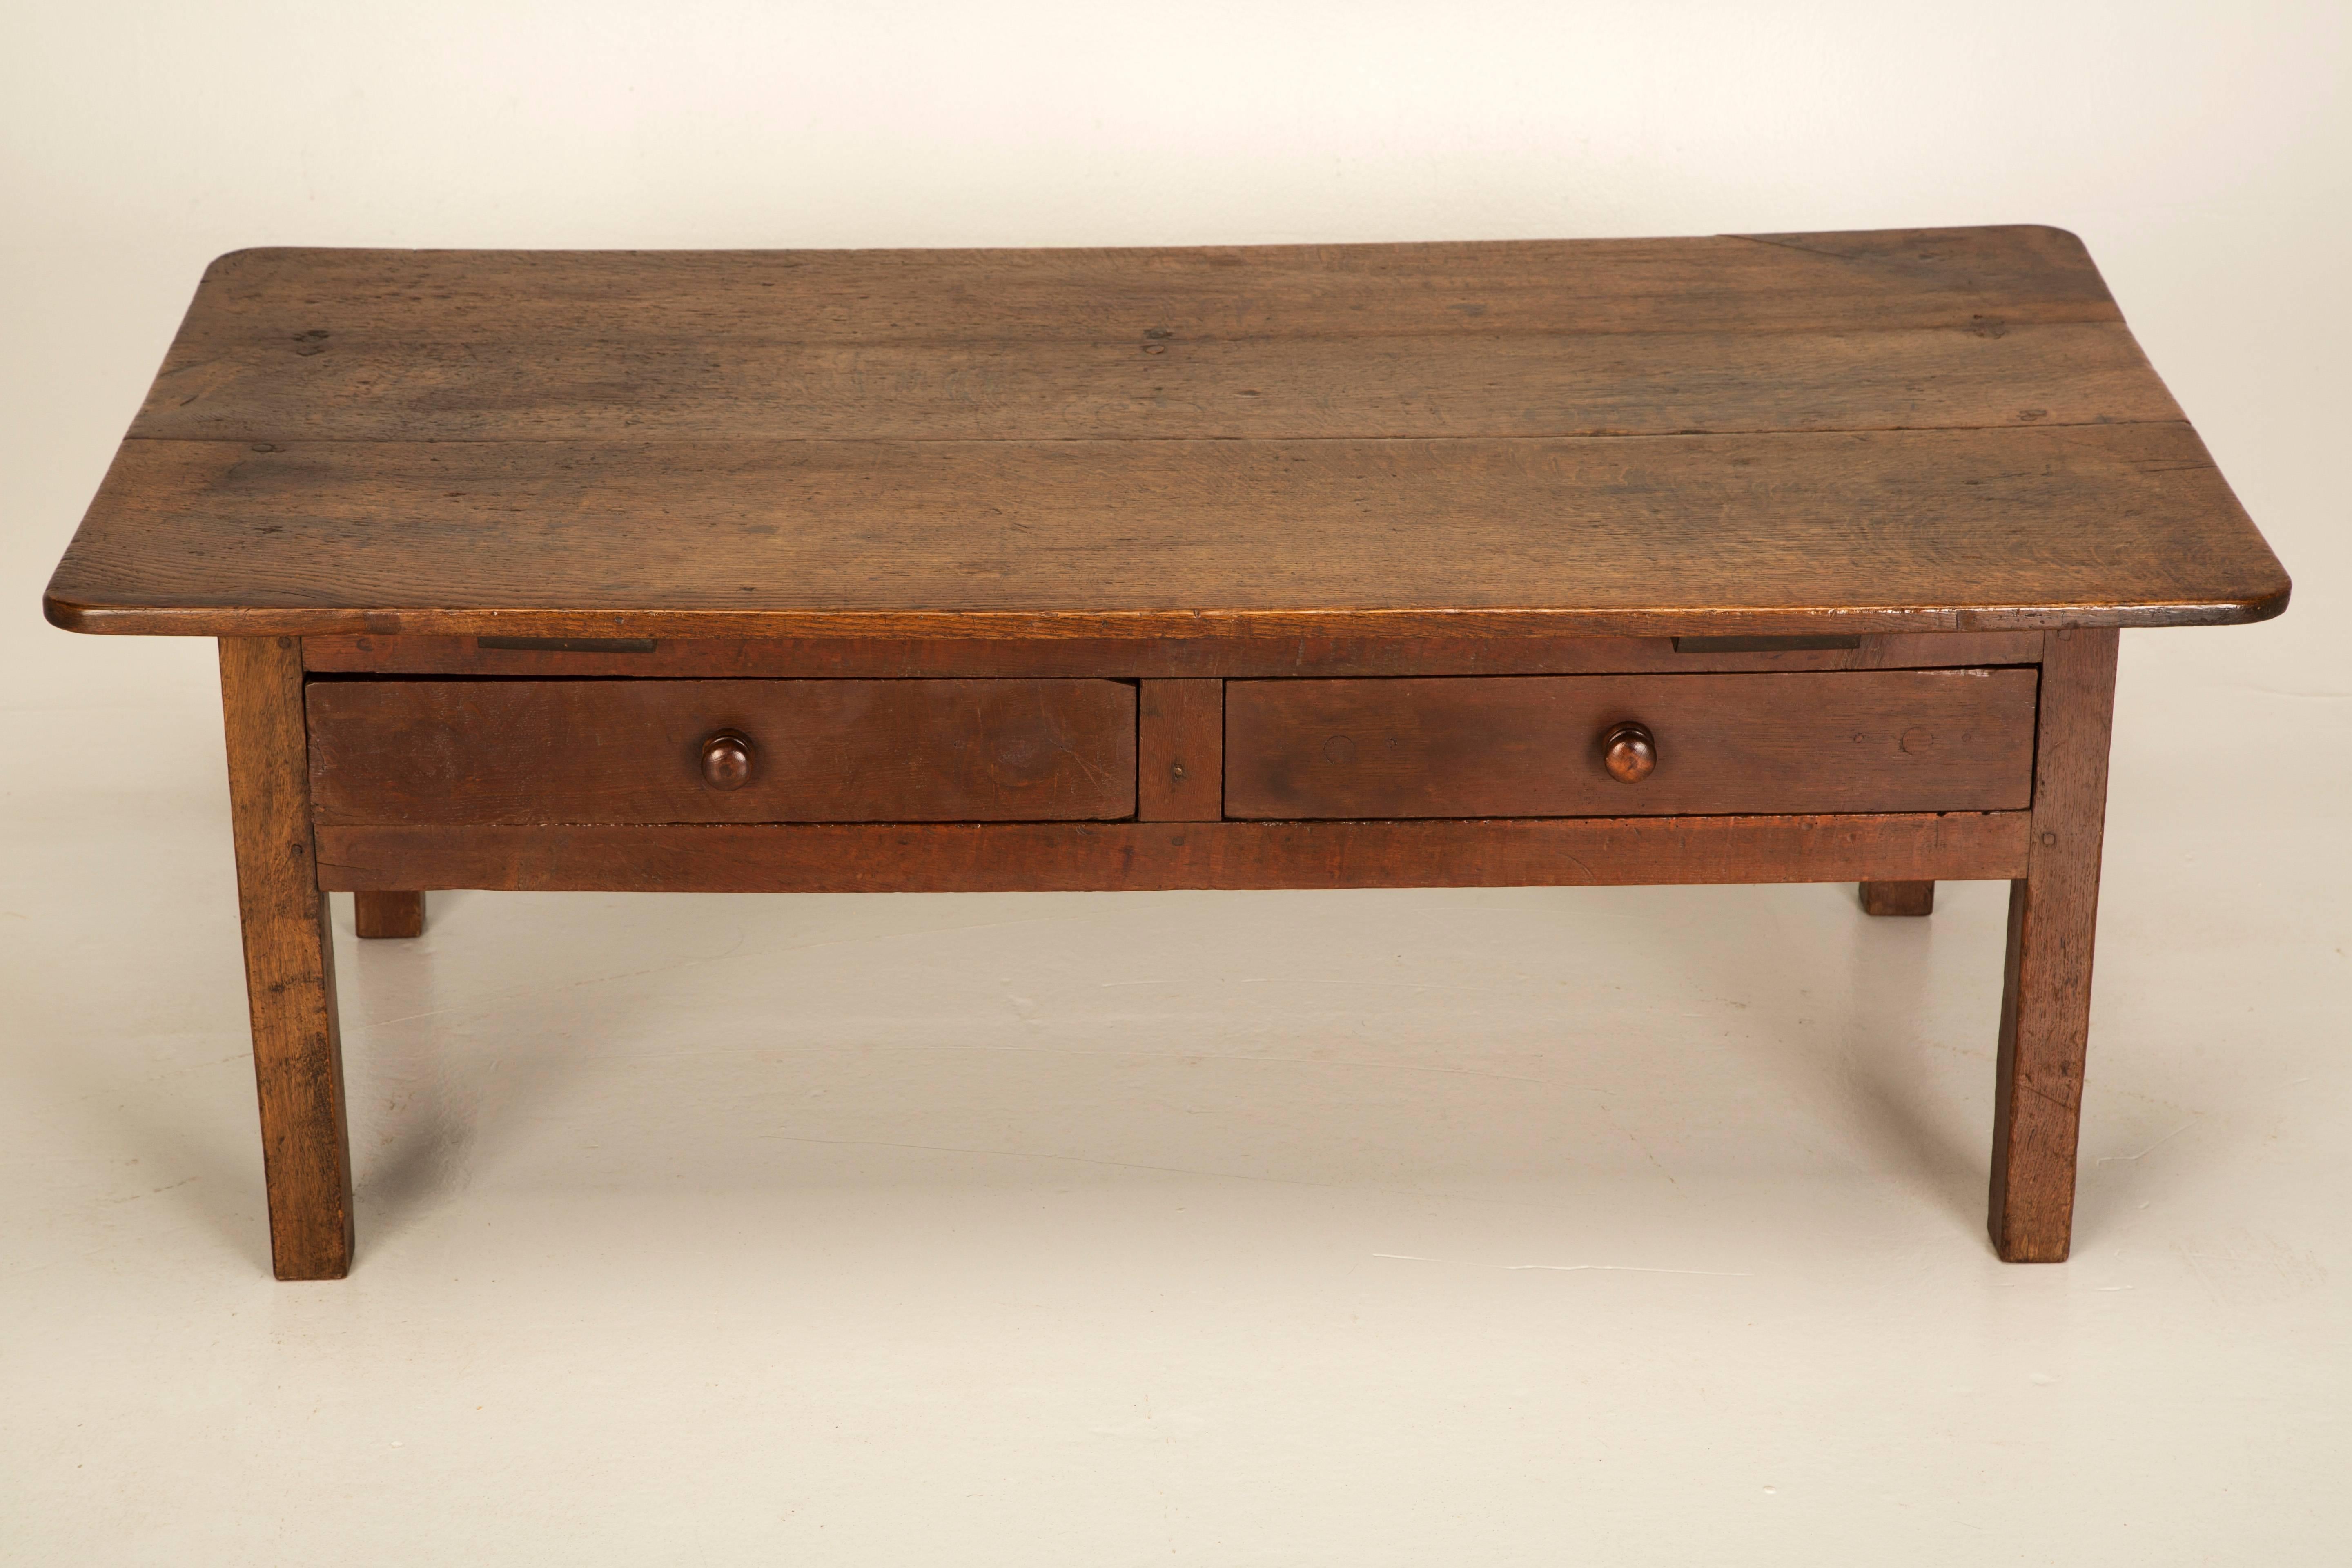 I know that calling this an antique coffee table makes little sense, since there really is no such thing, however, this is an antique English table, that someone a long time ago cut-down to coffee table height. So, you have this 150-year-old oak